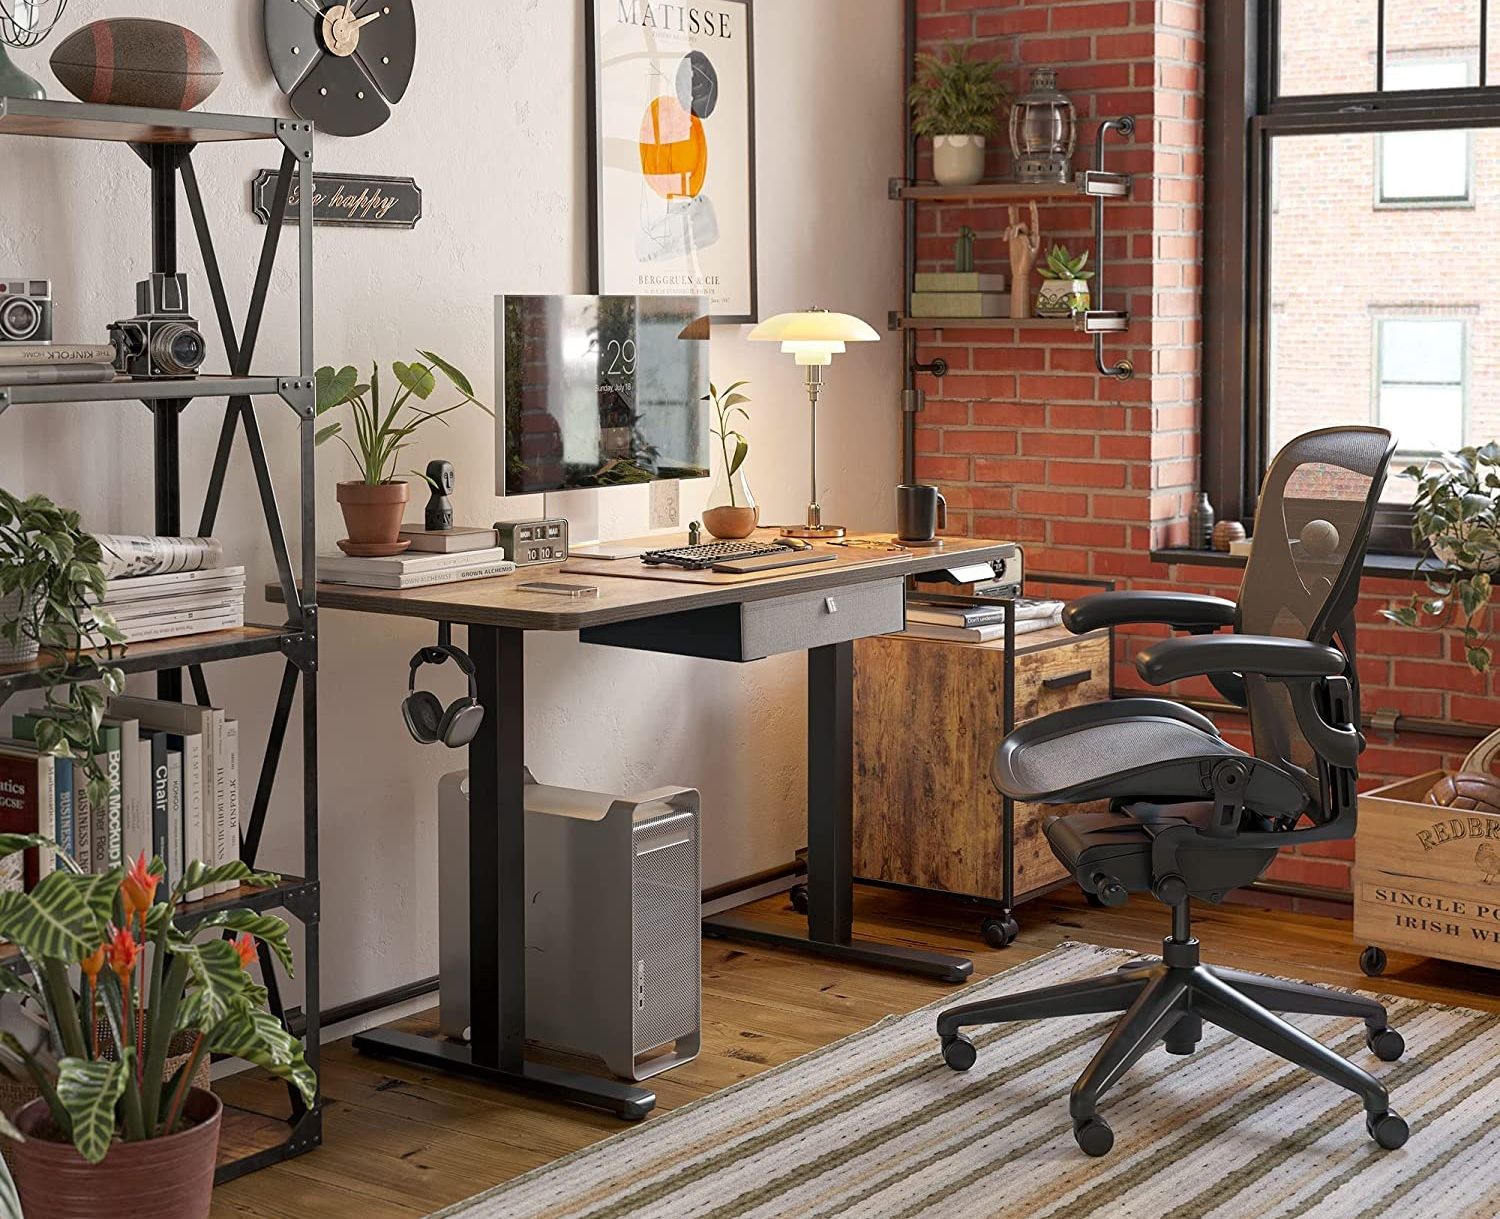 the fezibo standing desk positioned in an office with rustic decorations